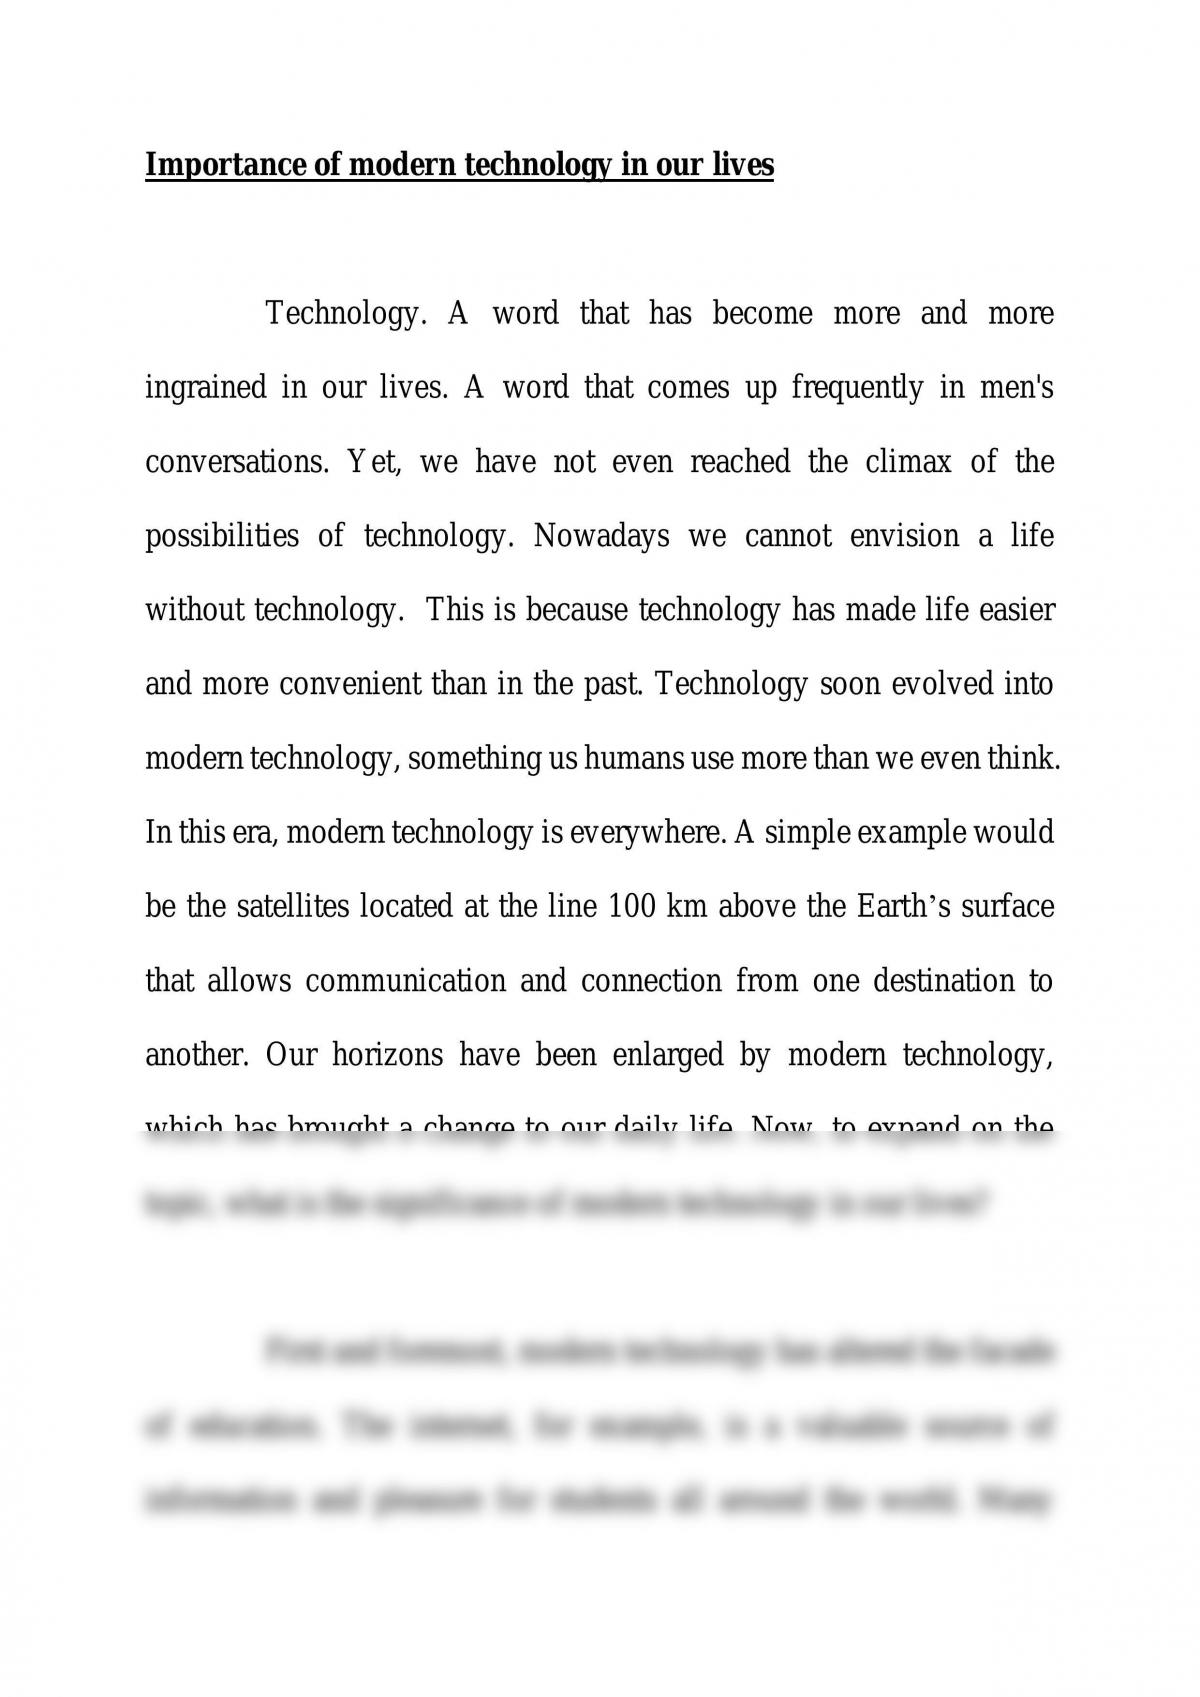 essay on use of technology in our daily life